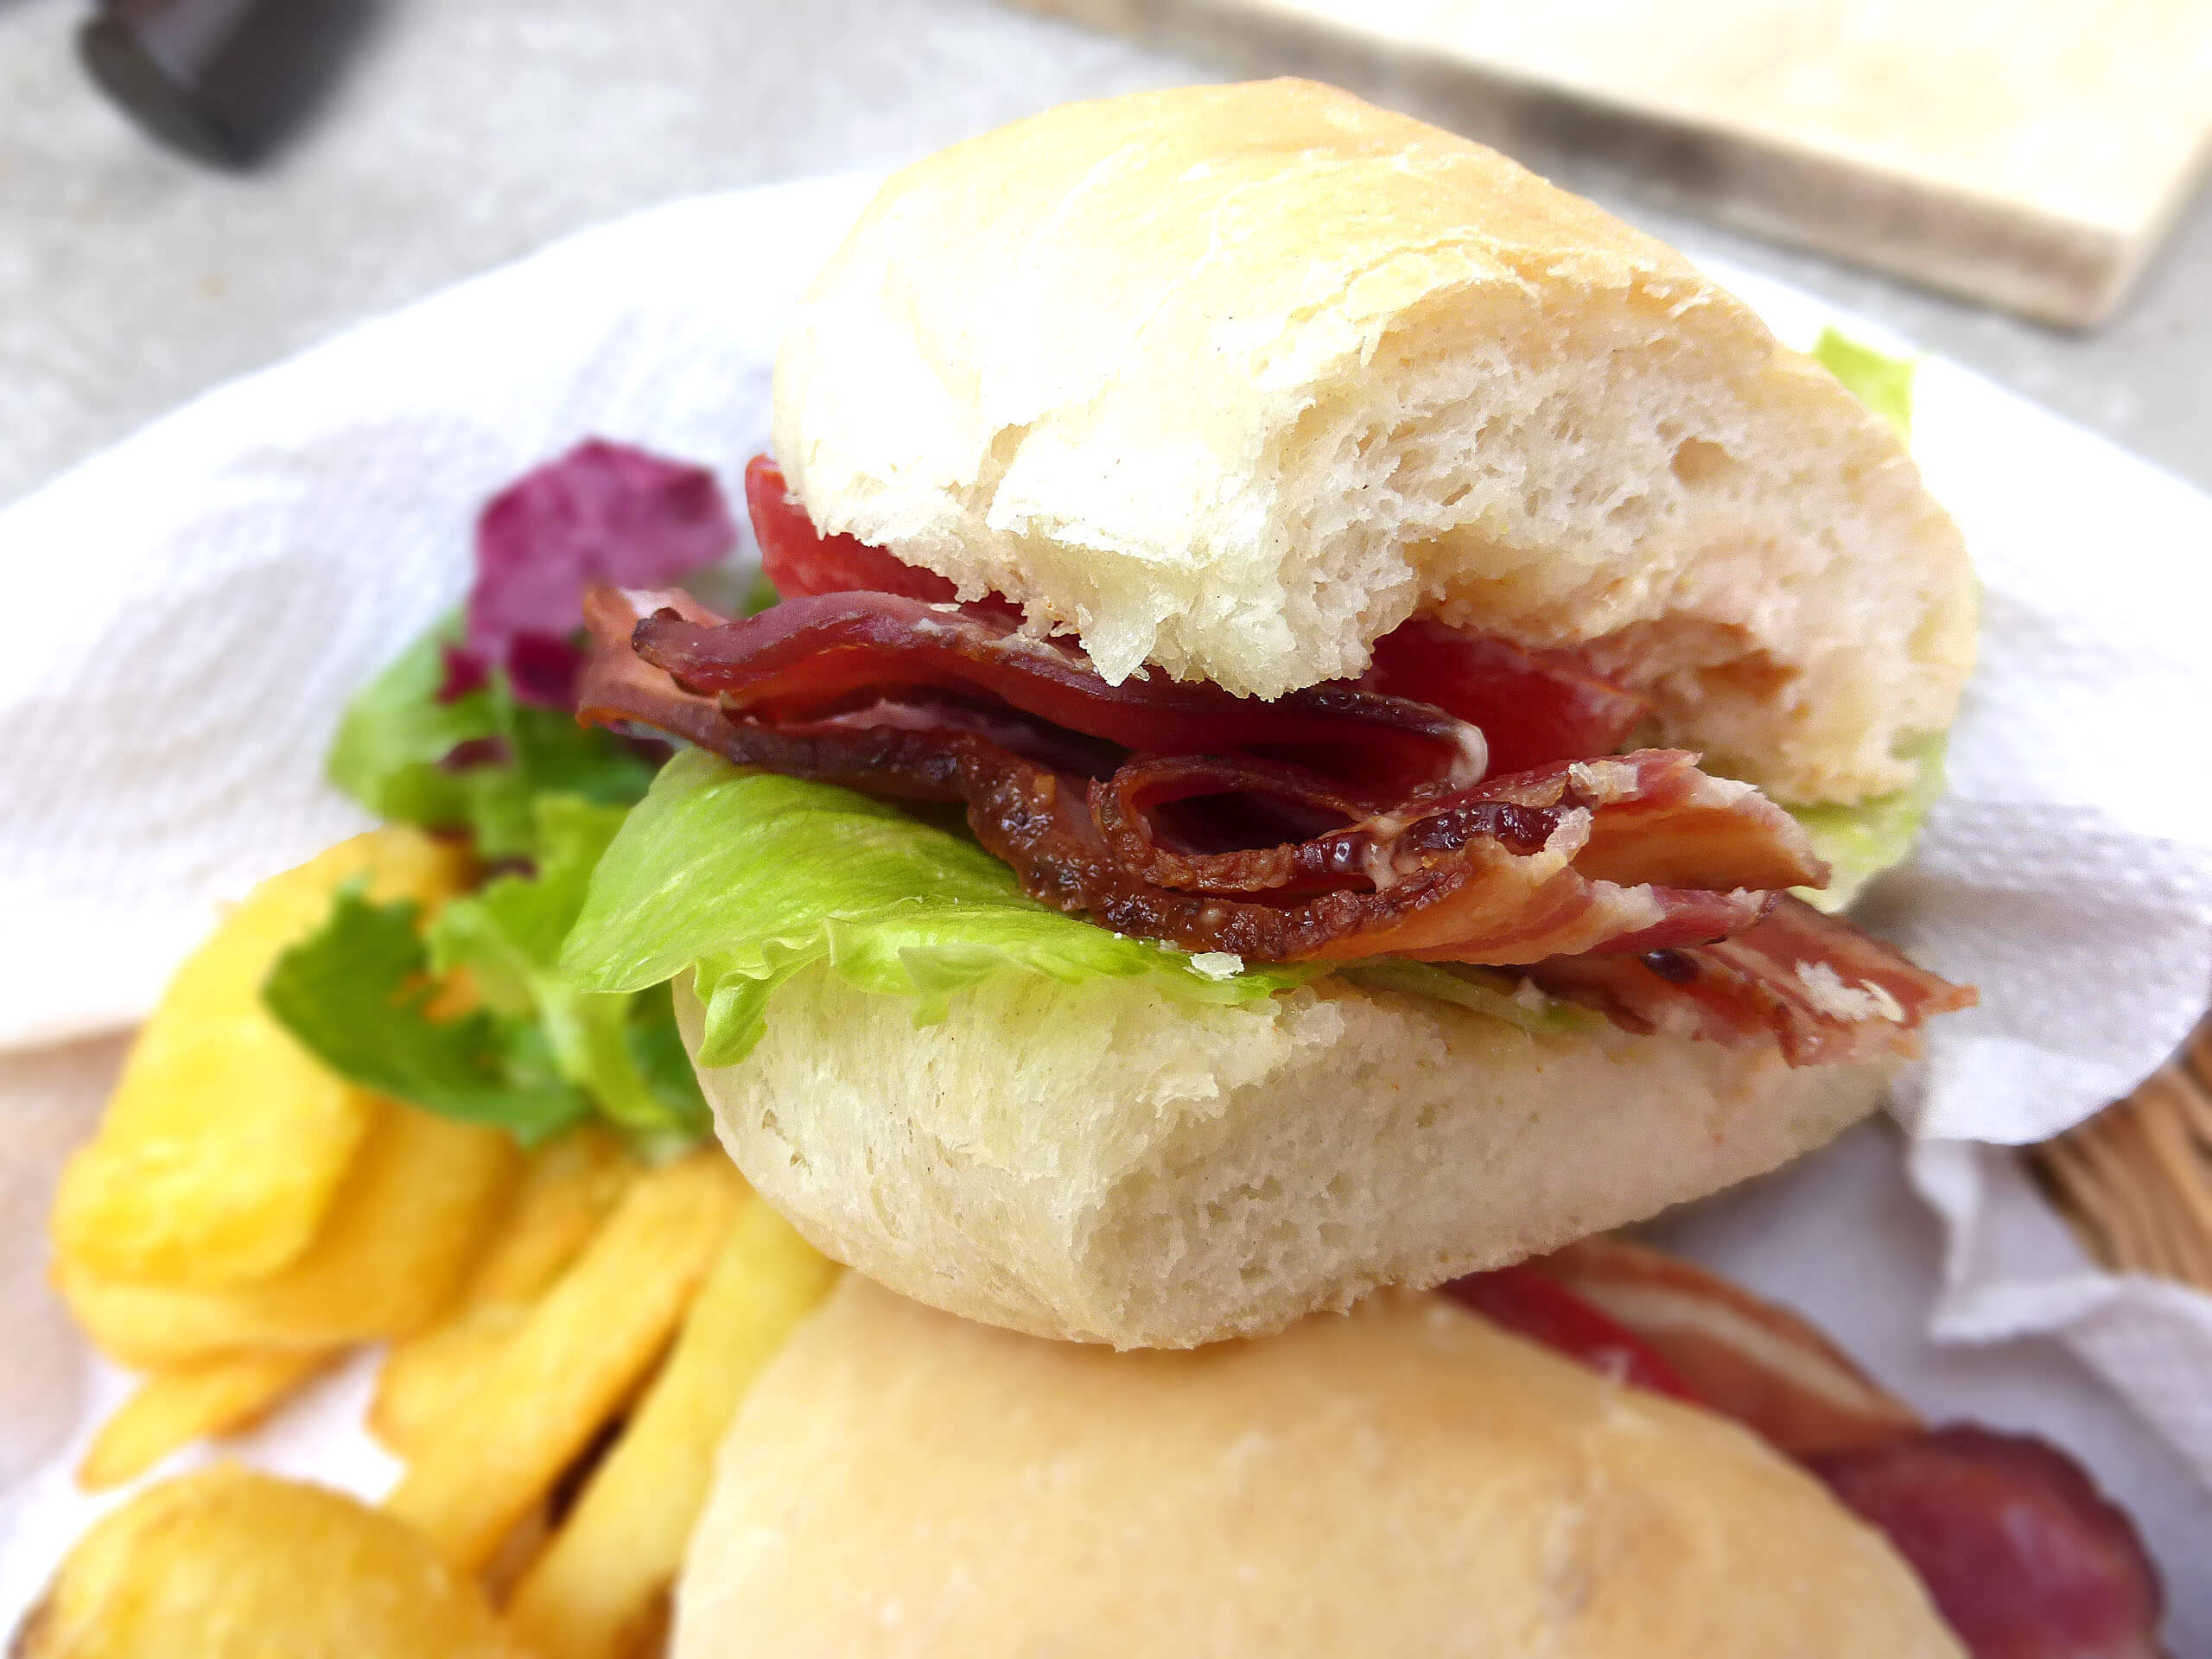 The Best BLT in Homemade Buns with Smoky Chilli Mayo